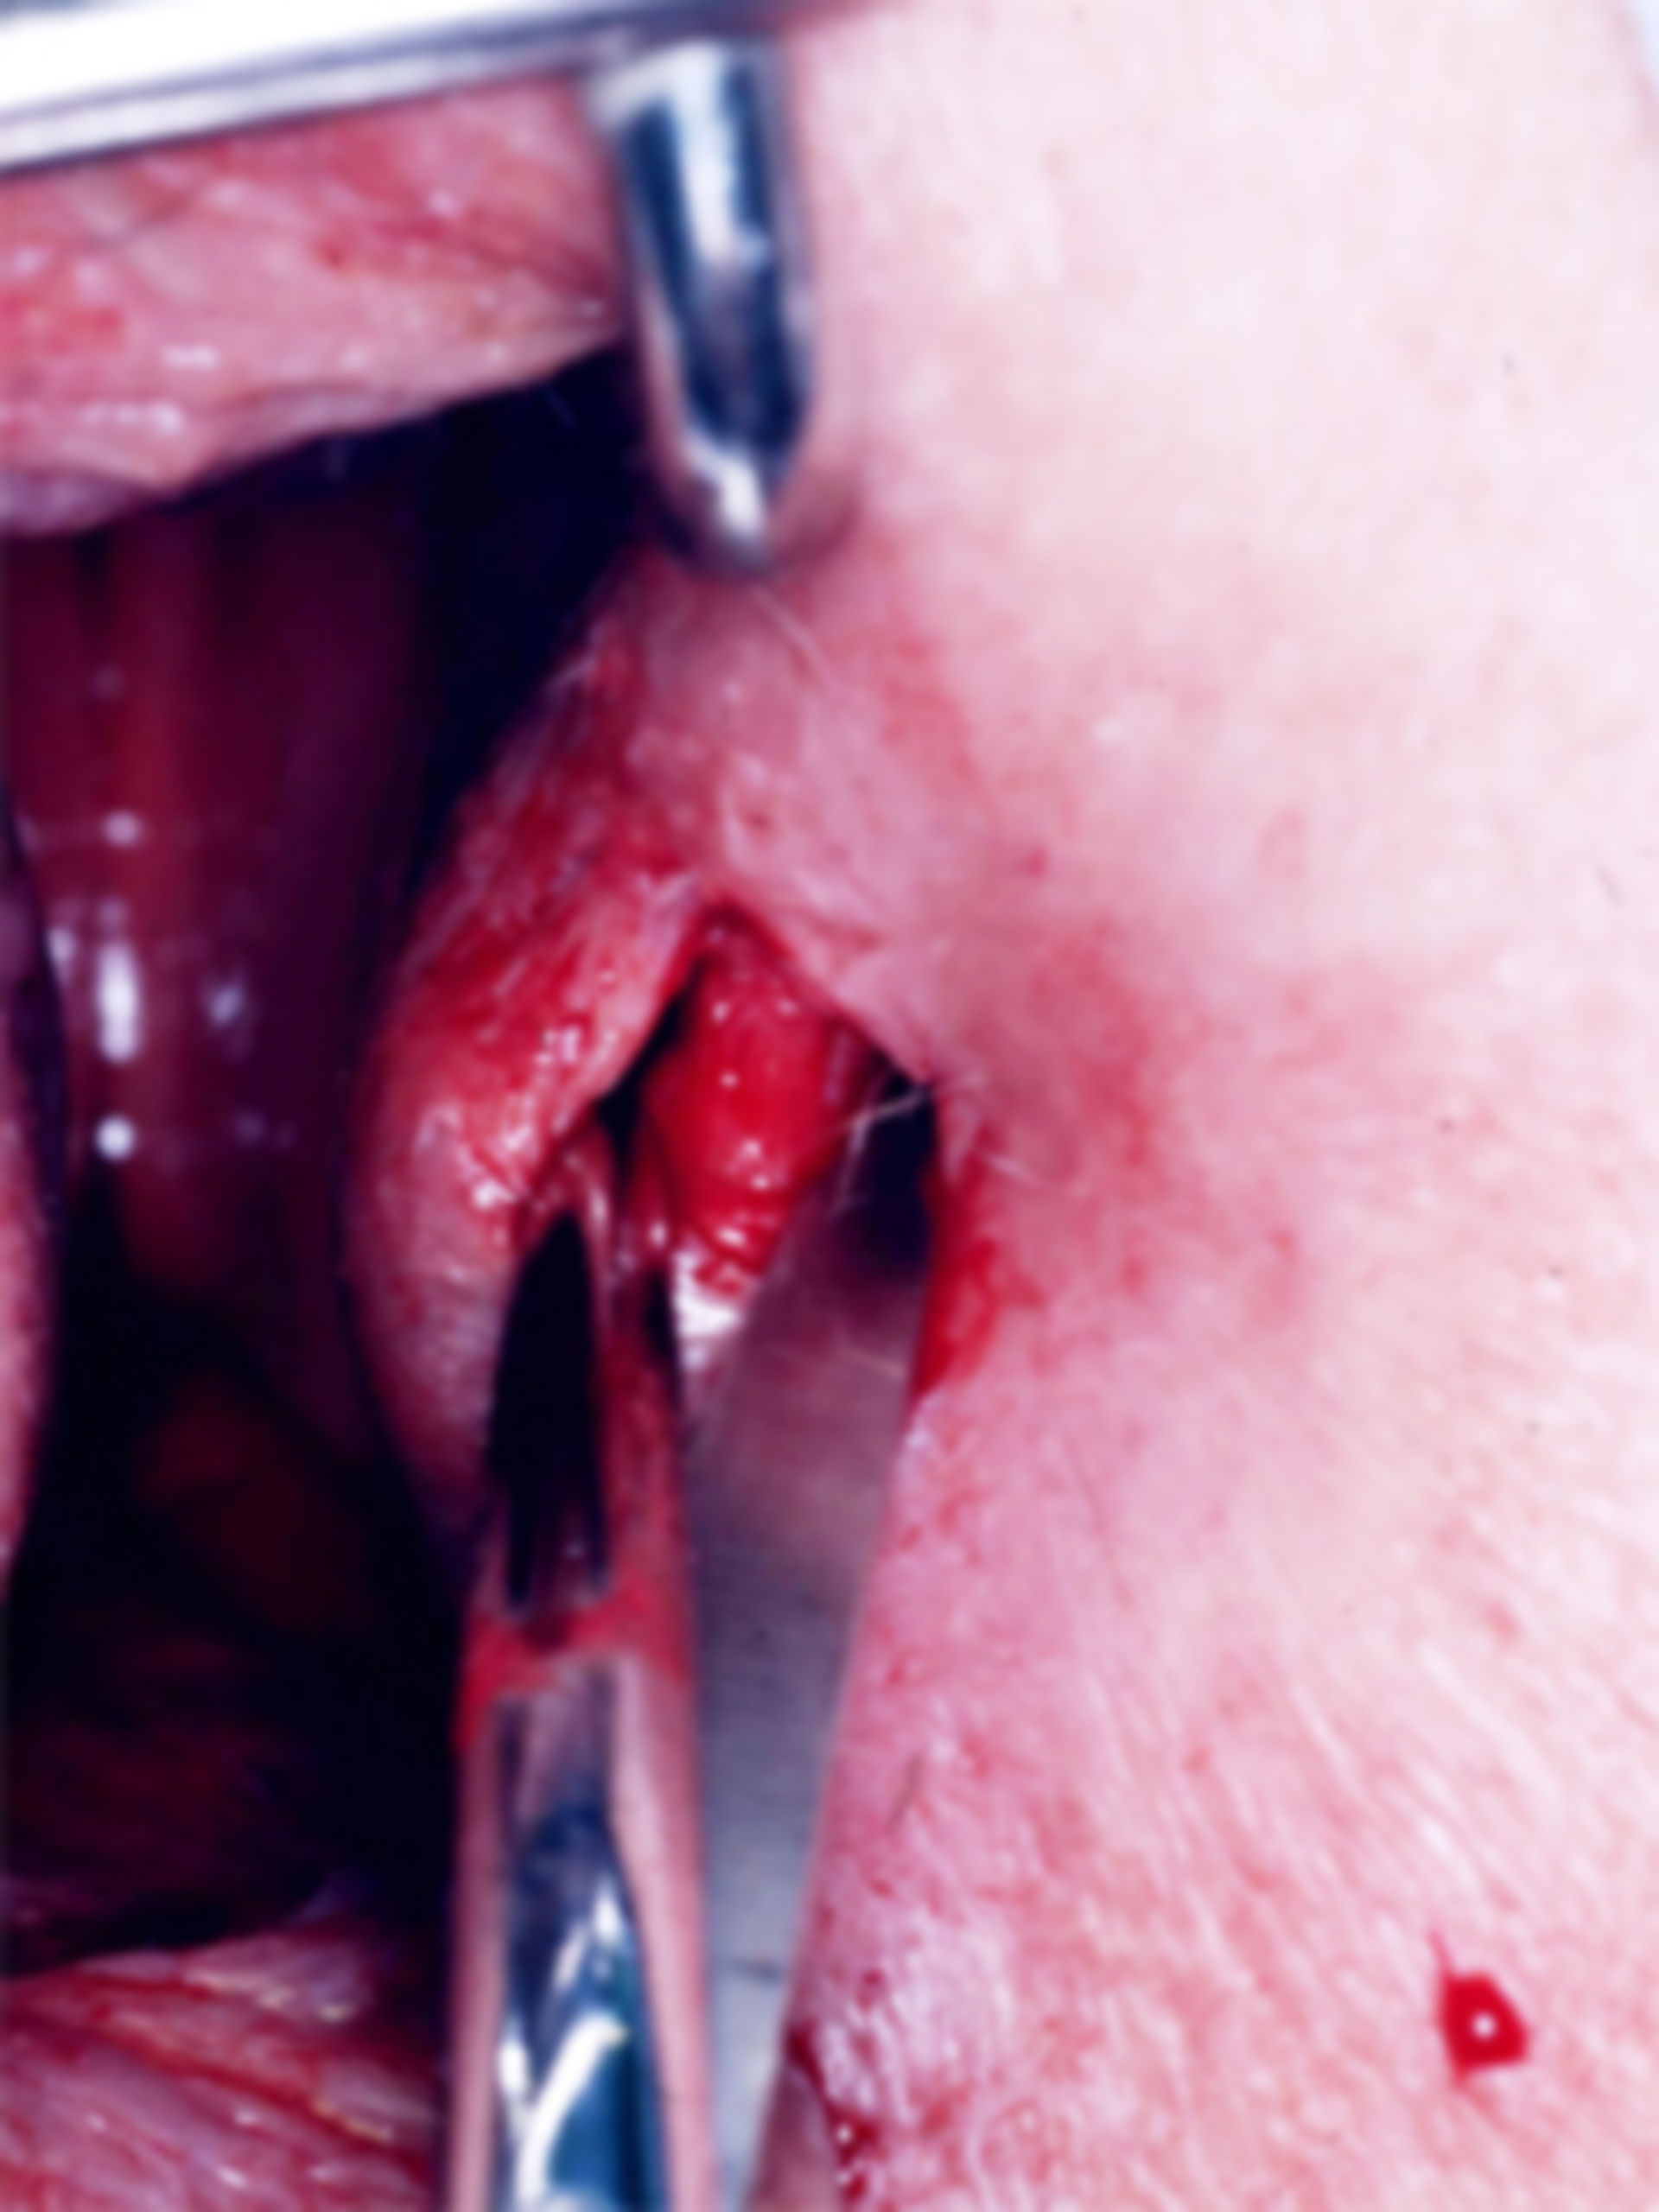 Anal Fissure: Surgical Therapy